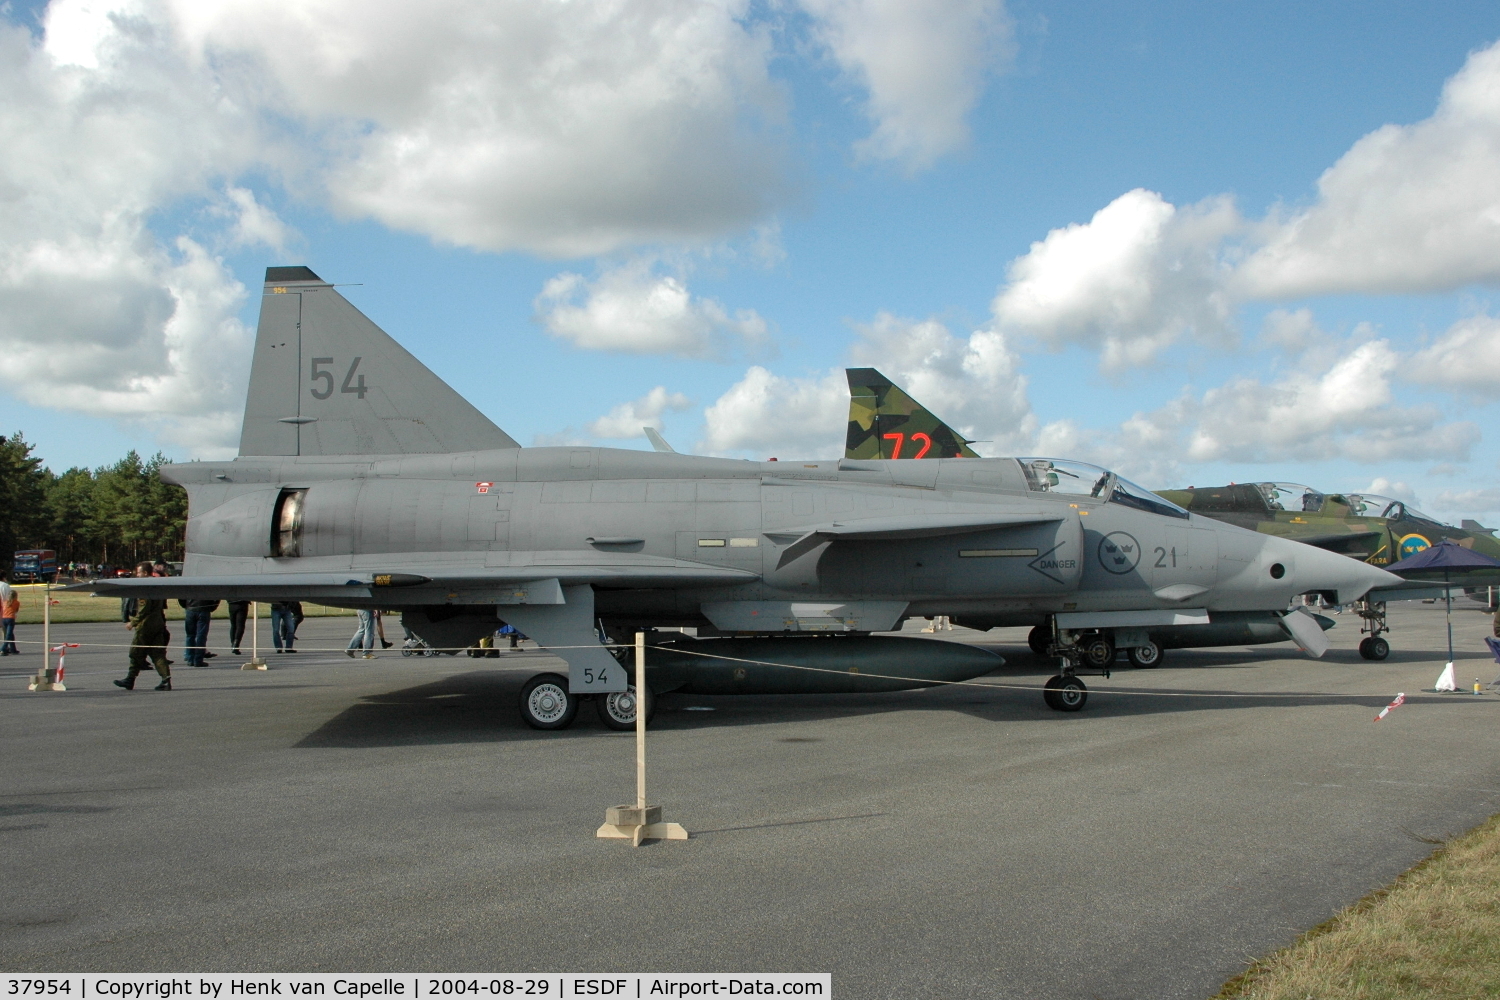 37954, Saab AJSF 37 Viggen C/N 37954, Saab AJSF37 Viggen reconaissance fighter of the Swedish Air Force at Ronneby Air Base, Sweden.